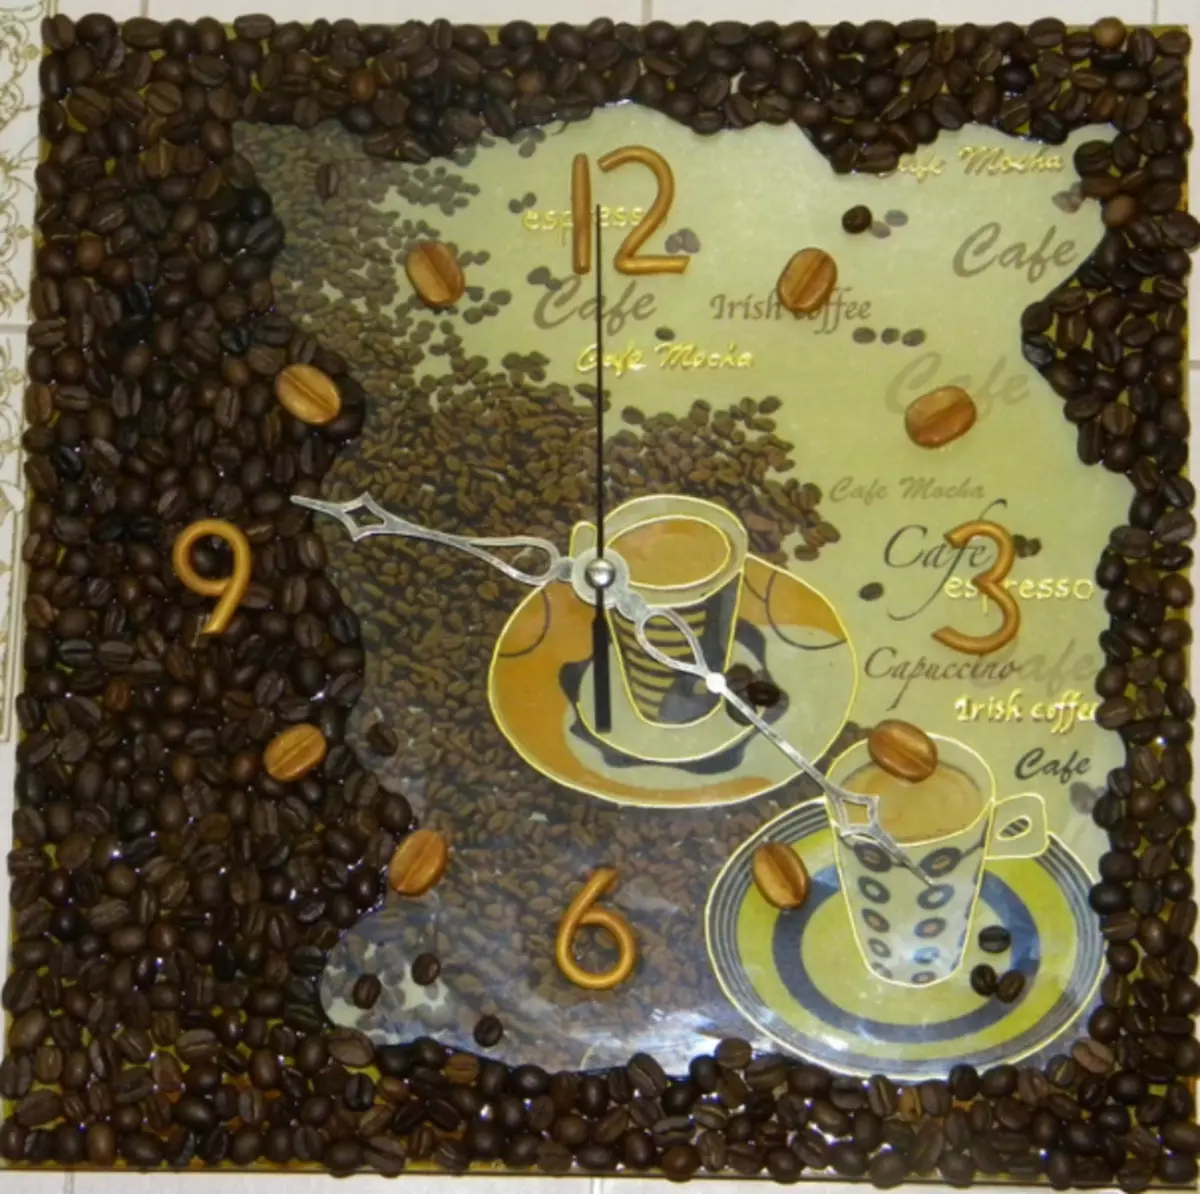 Master class on crafts from coffee beans do it yourself with photos and videos